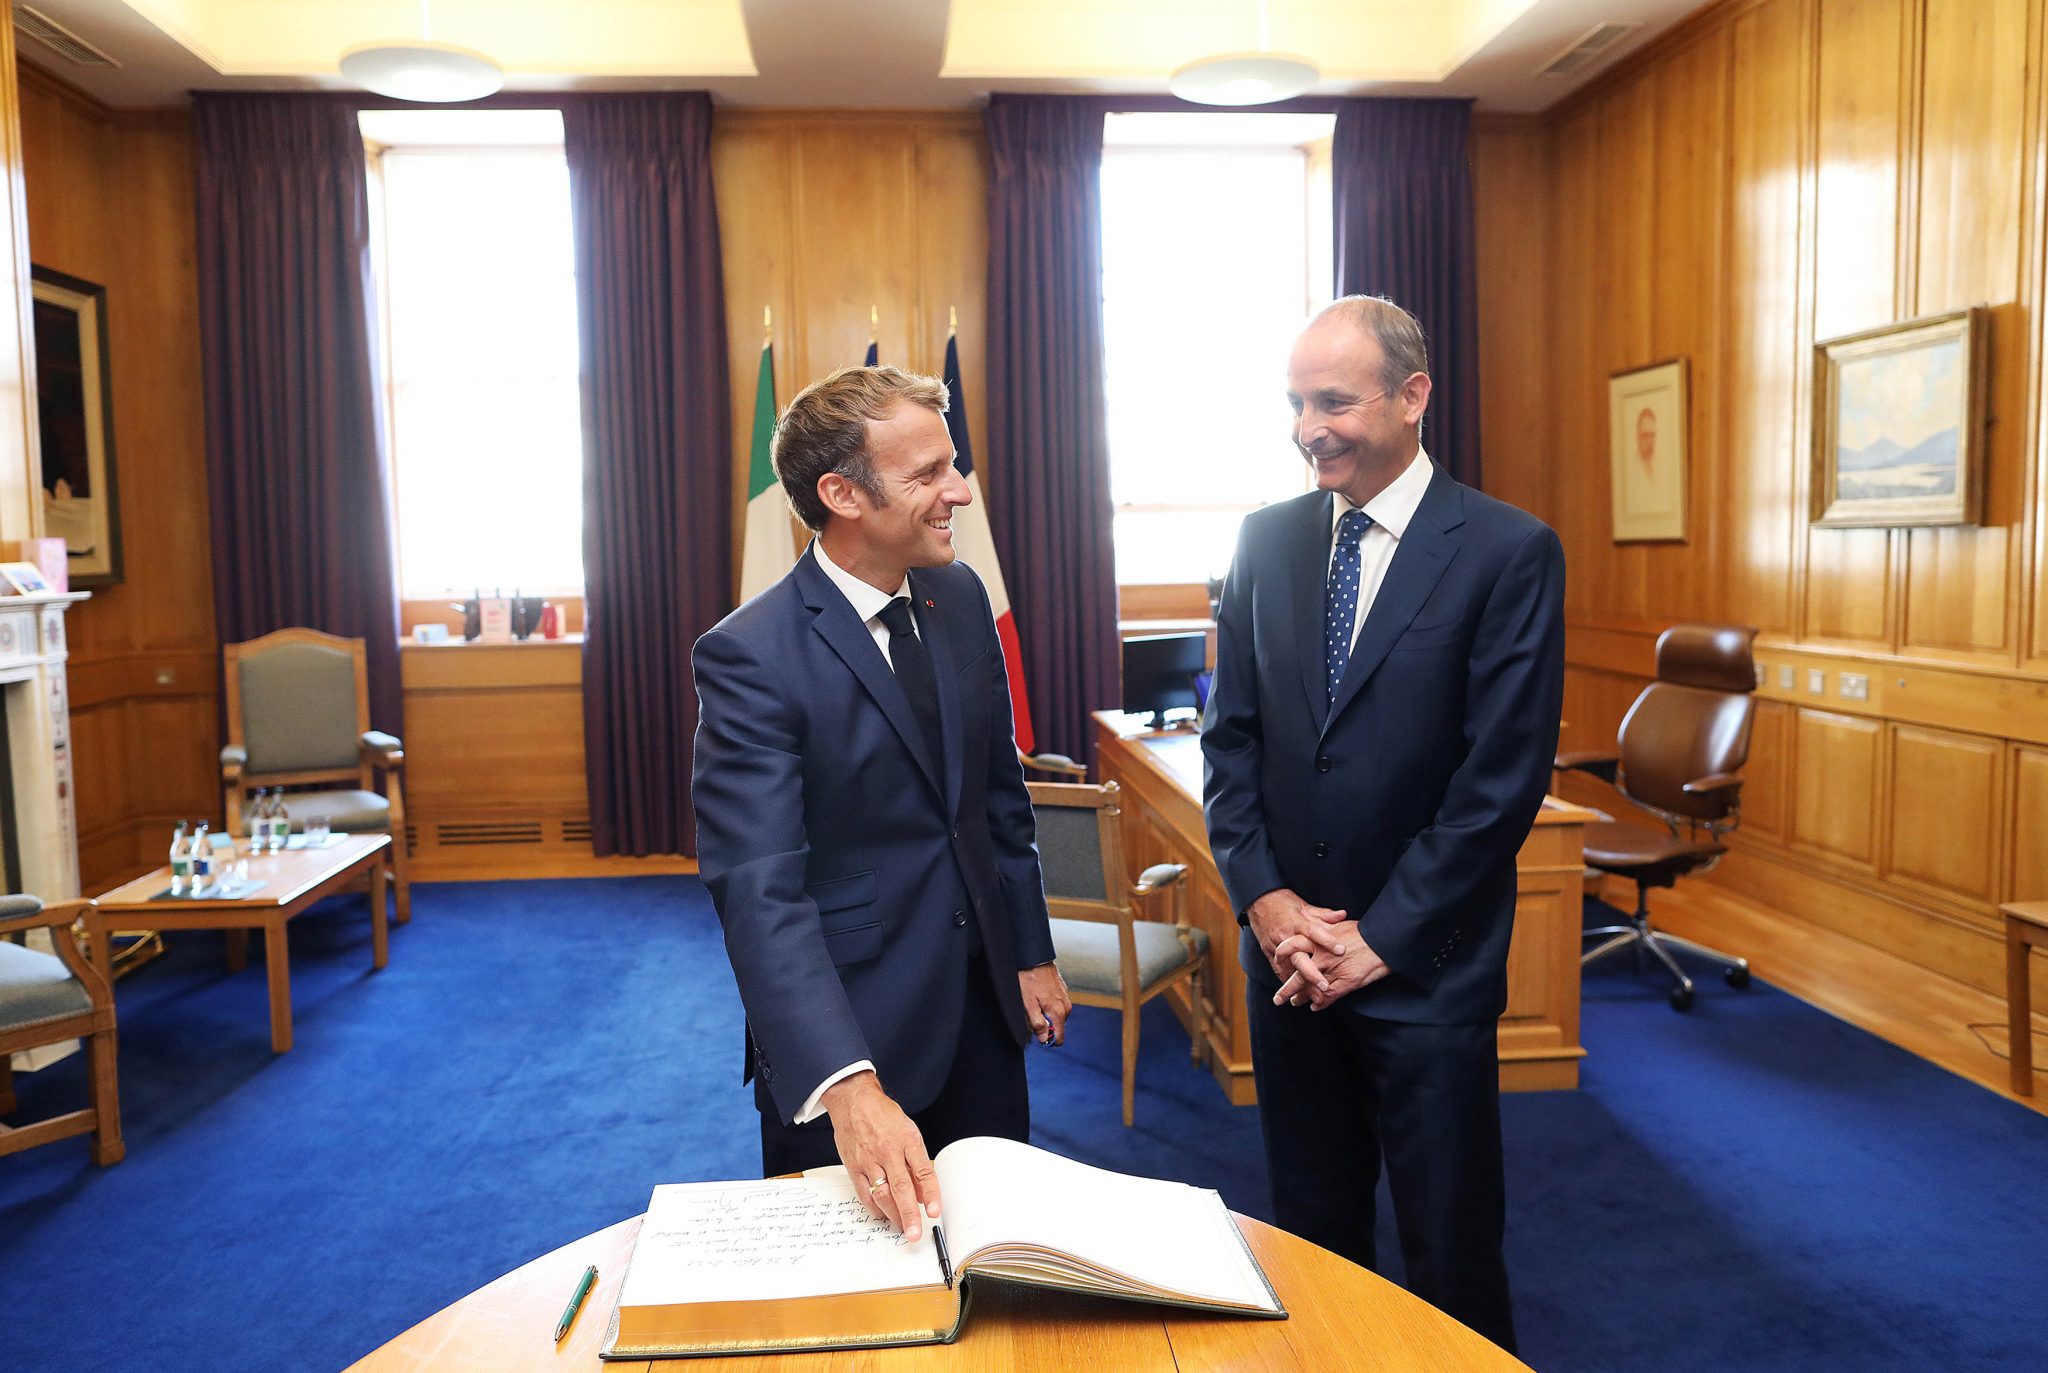 French President Emmanuel Macron with the Taoiseach Micheál Martin at Government Buildings, 26-08-2021. Image: Julien Behal Photography